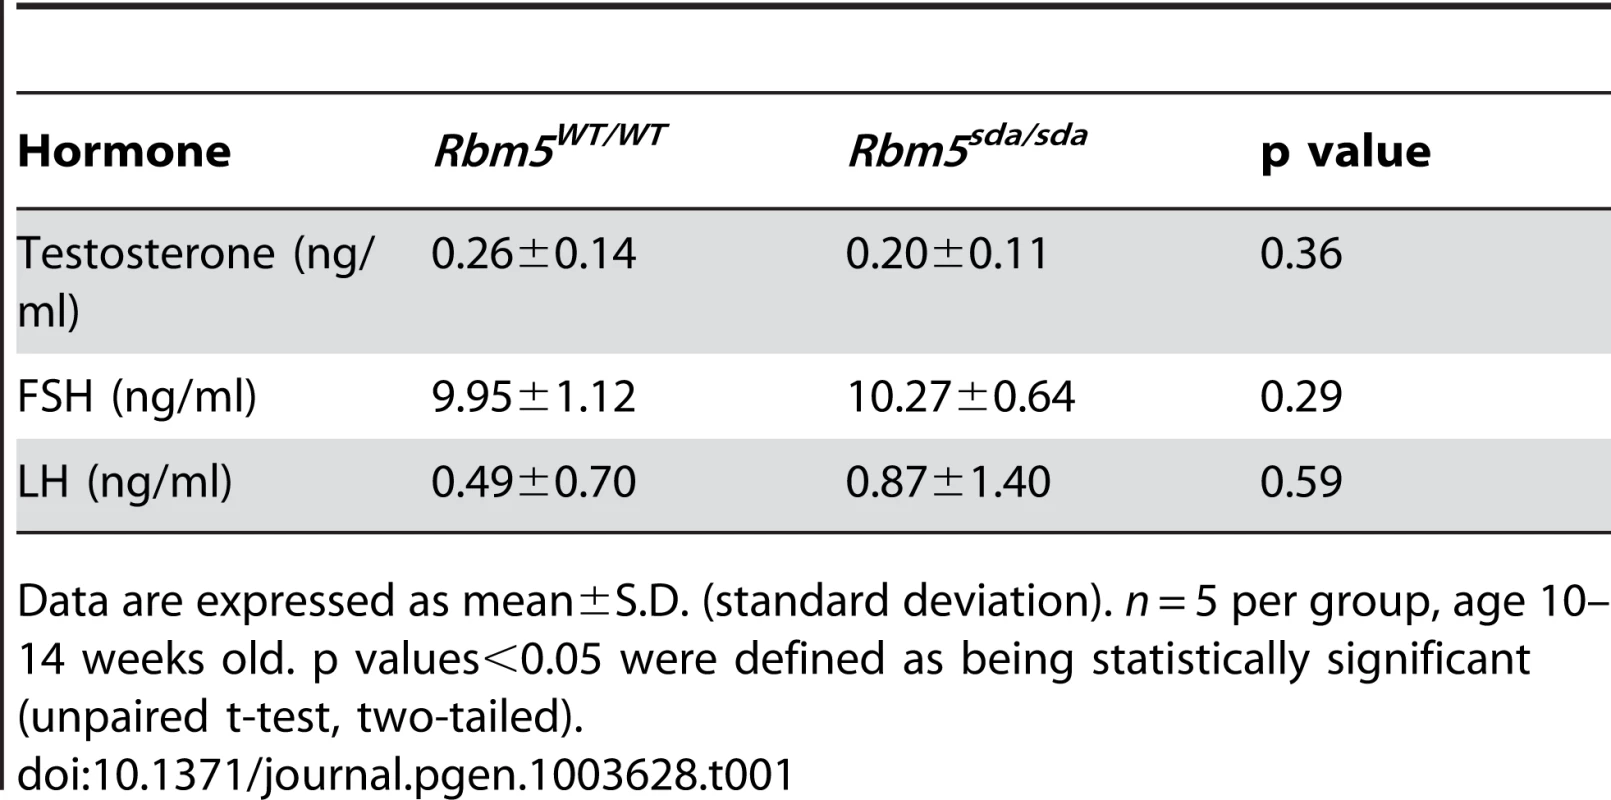 Levels of serum testosterone, FSH and LH in adult <i>Rbm5<sup>sda/sda</sup></i> and <i>Rbm5<sup>WT/WT</sup></i> mice.